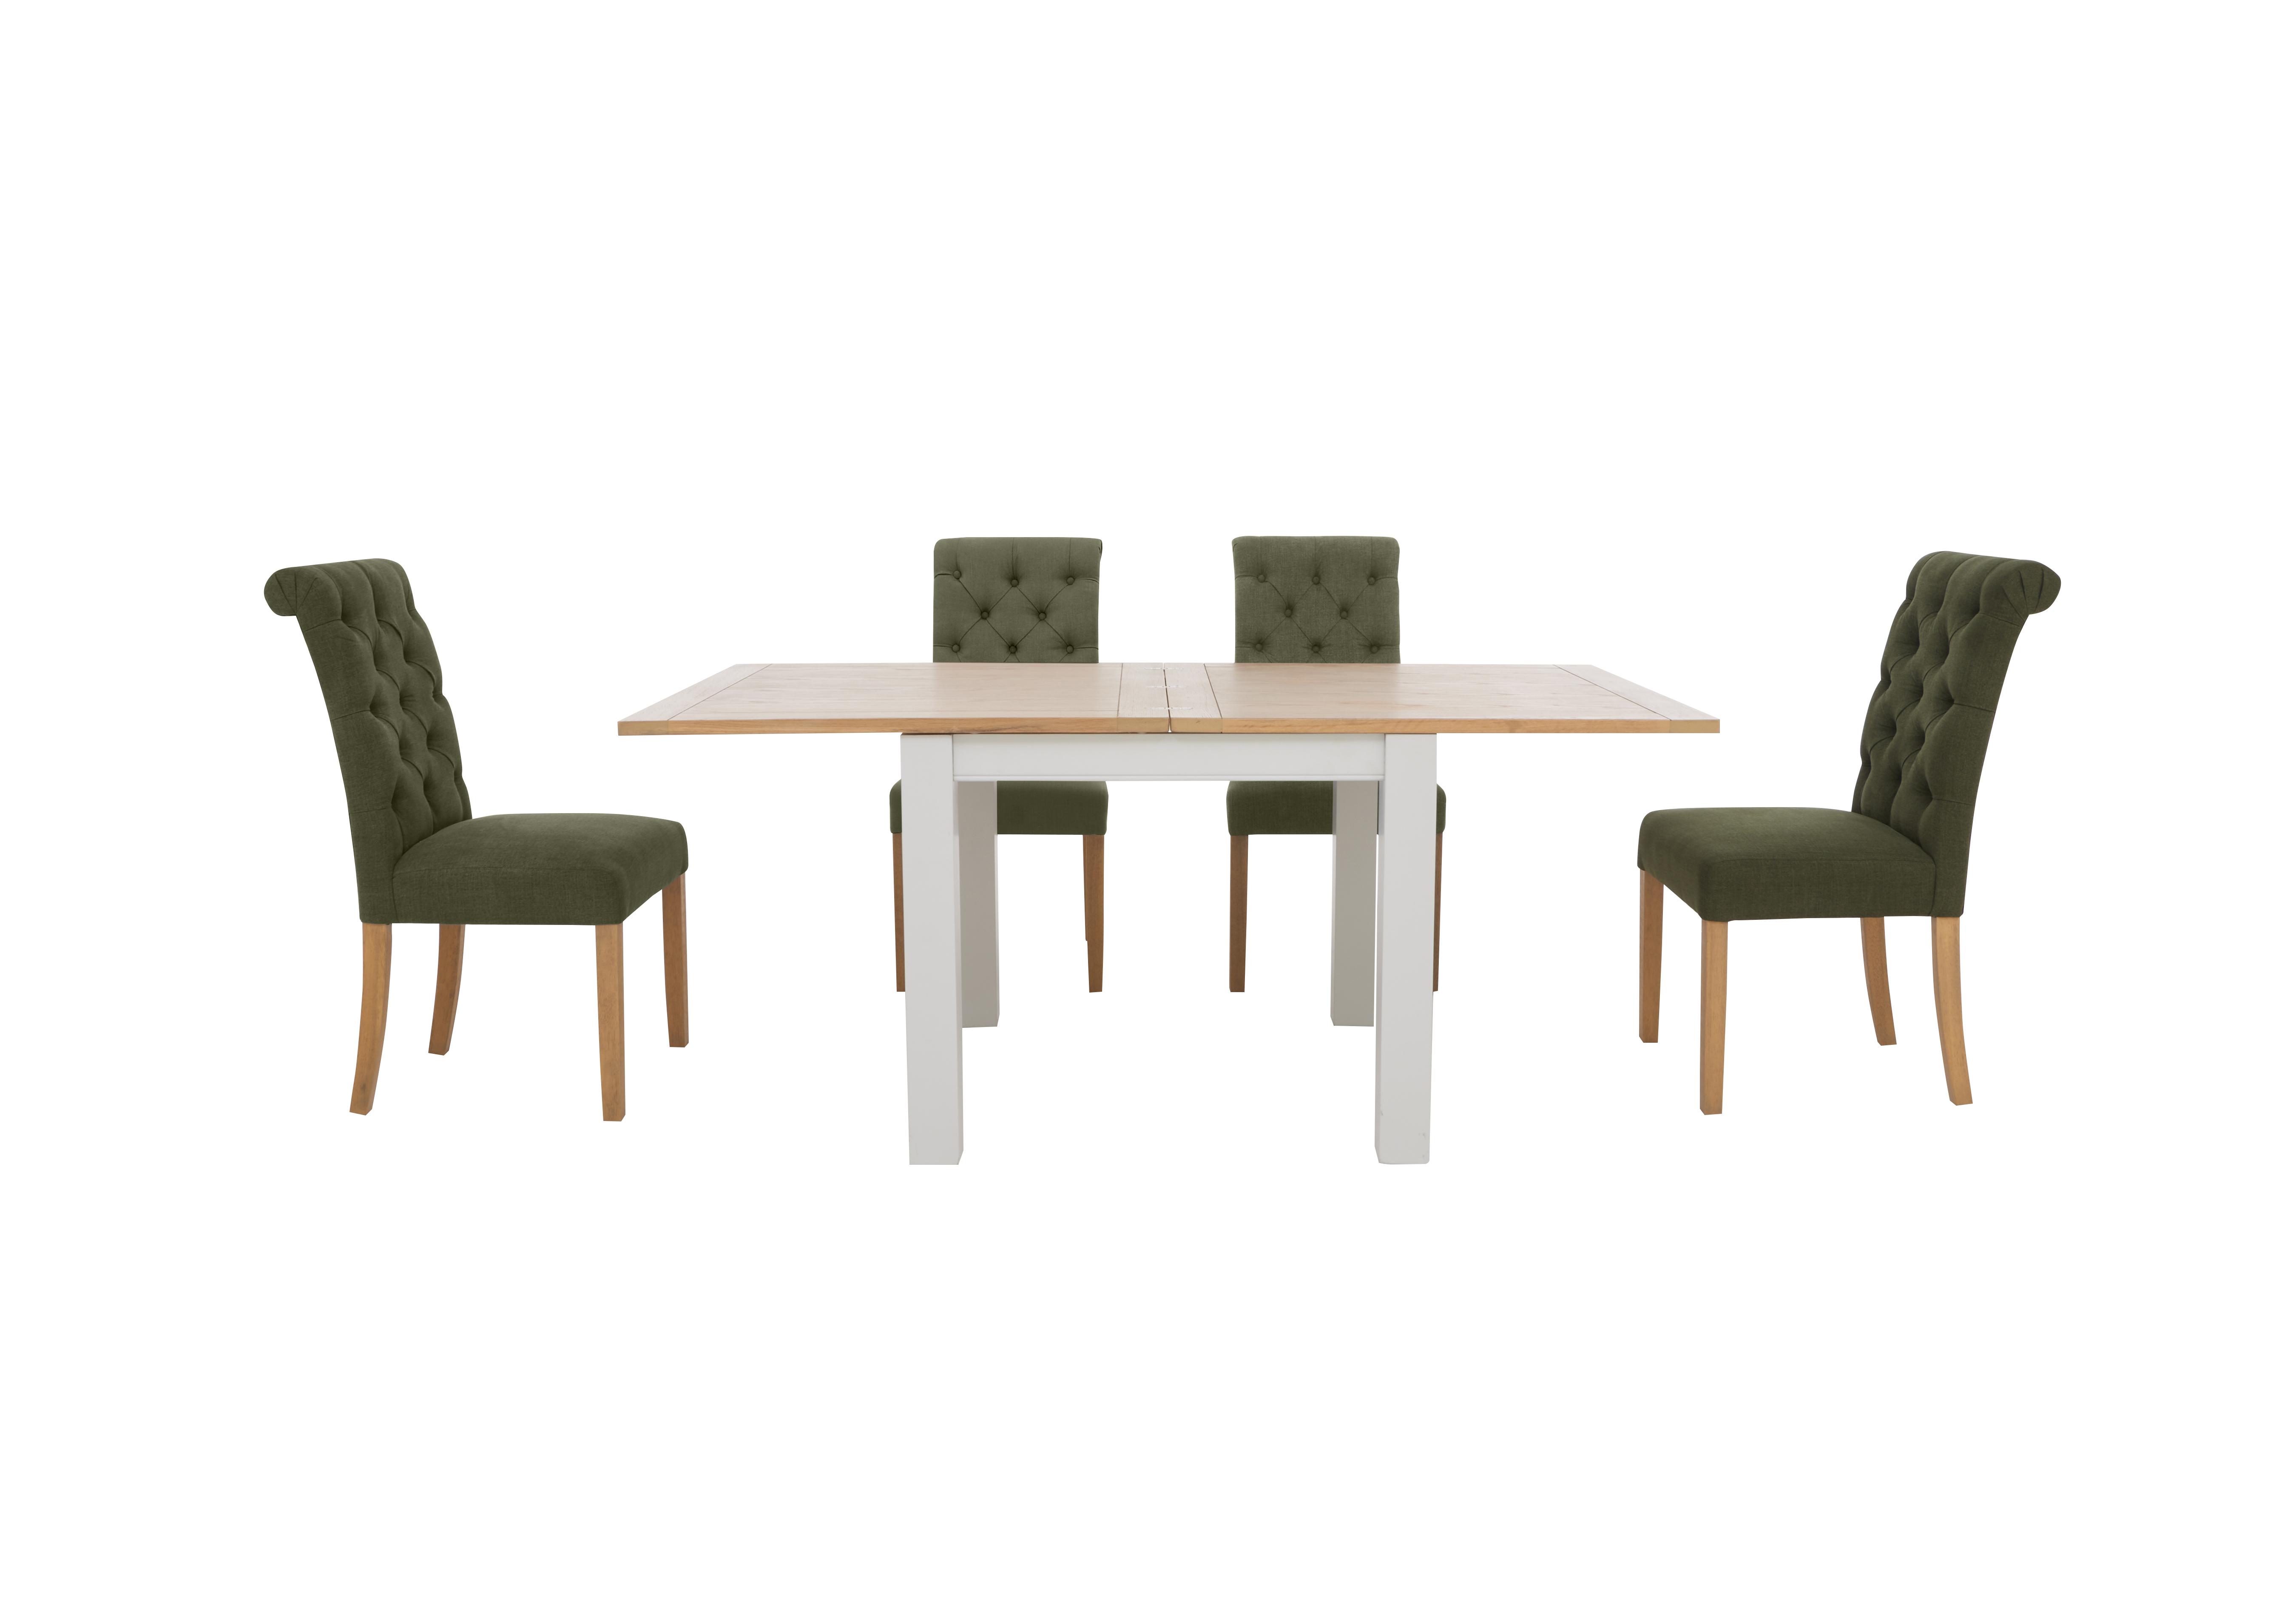 Hamilton Flip Top Dining Table and 4 Button Back Dining Chairs in Forest on Furniture Village